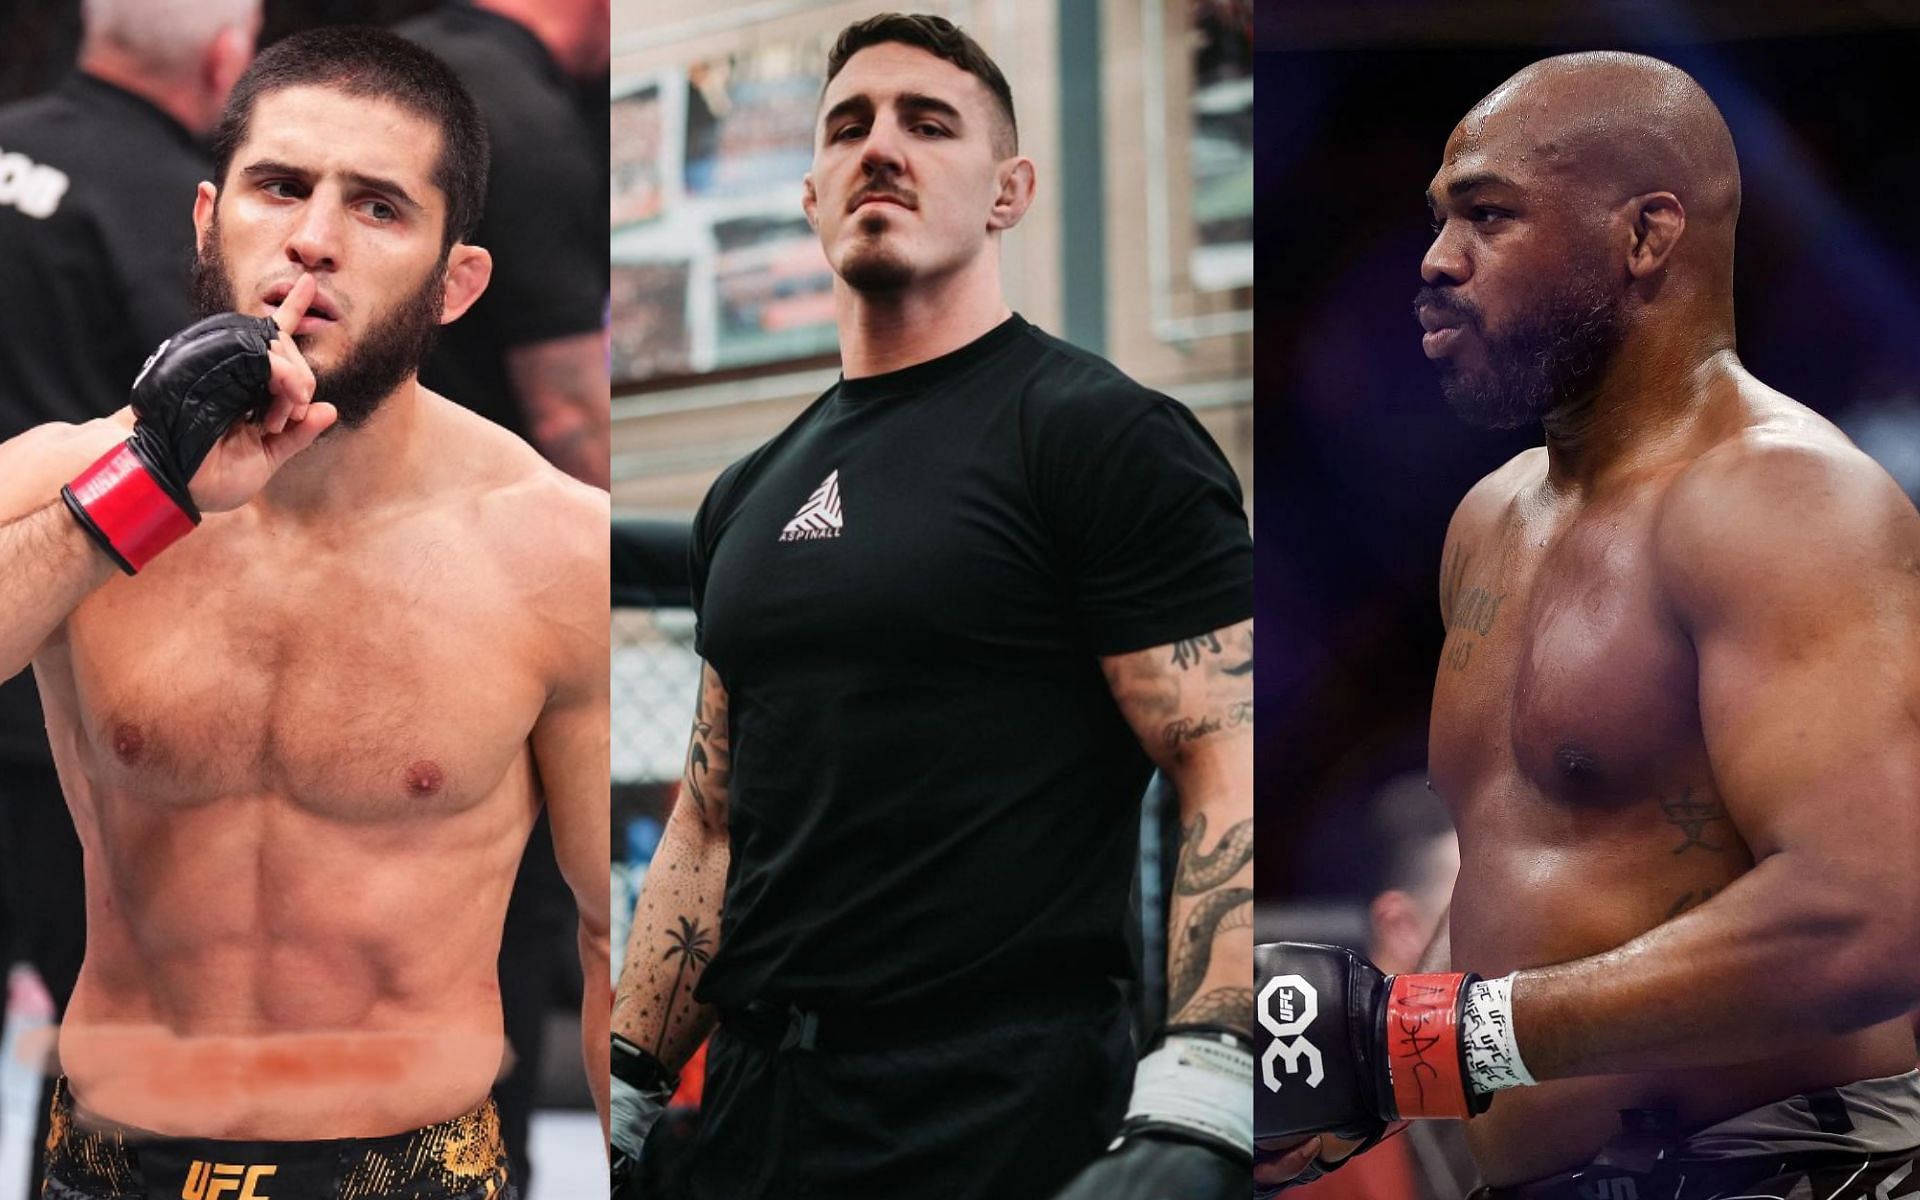 Tom Aspinall (middle) rubbishes P4P rankings as debate surrounding Islam Makhachev (left) and Jon Jones (right) rages on [Images courtesy: Getty Images, @islam_makhachev and @tomaspinallofficial on Instagram]